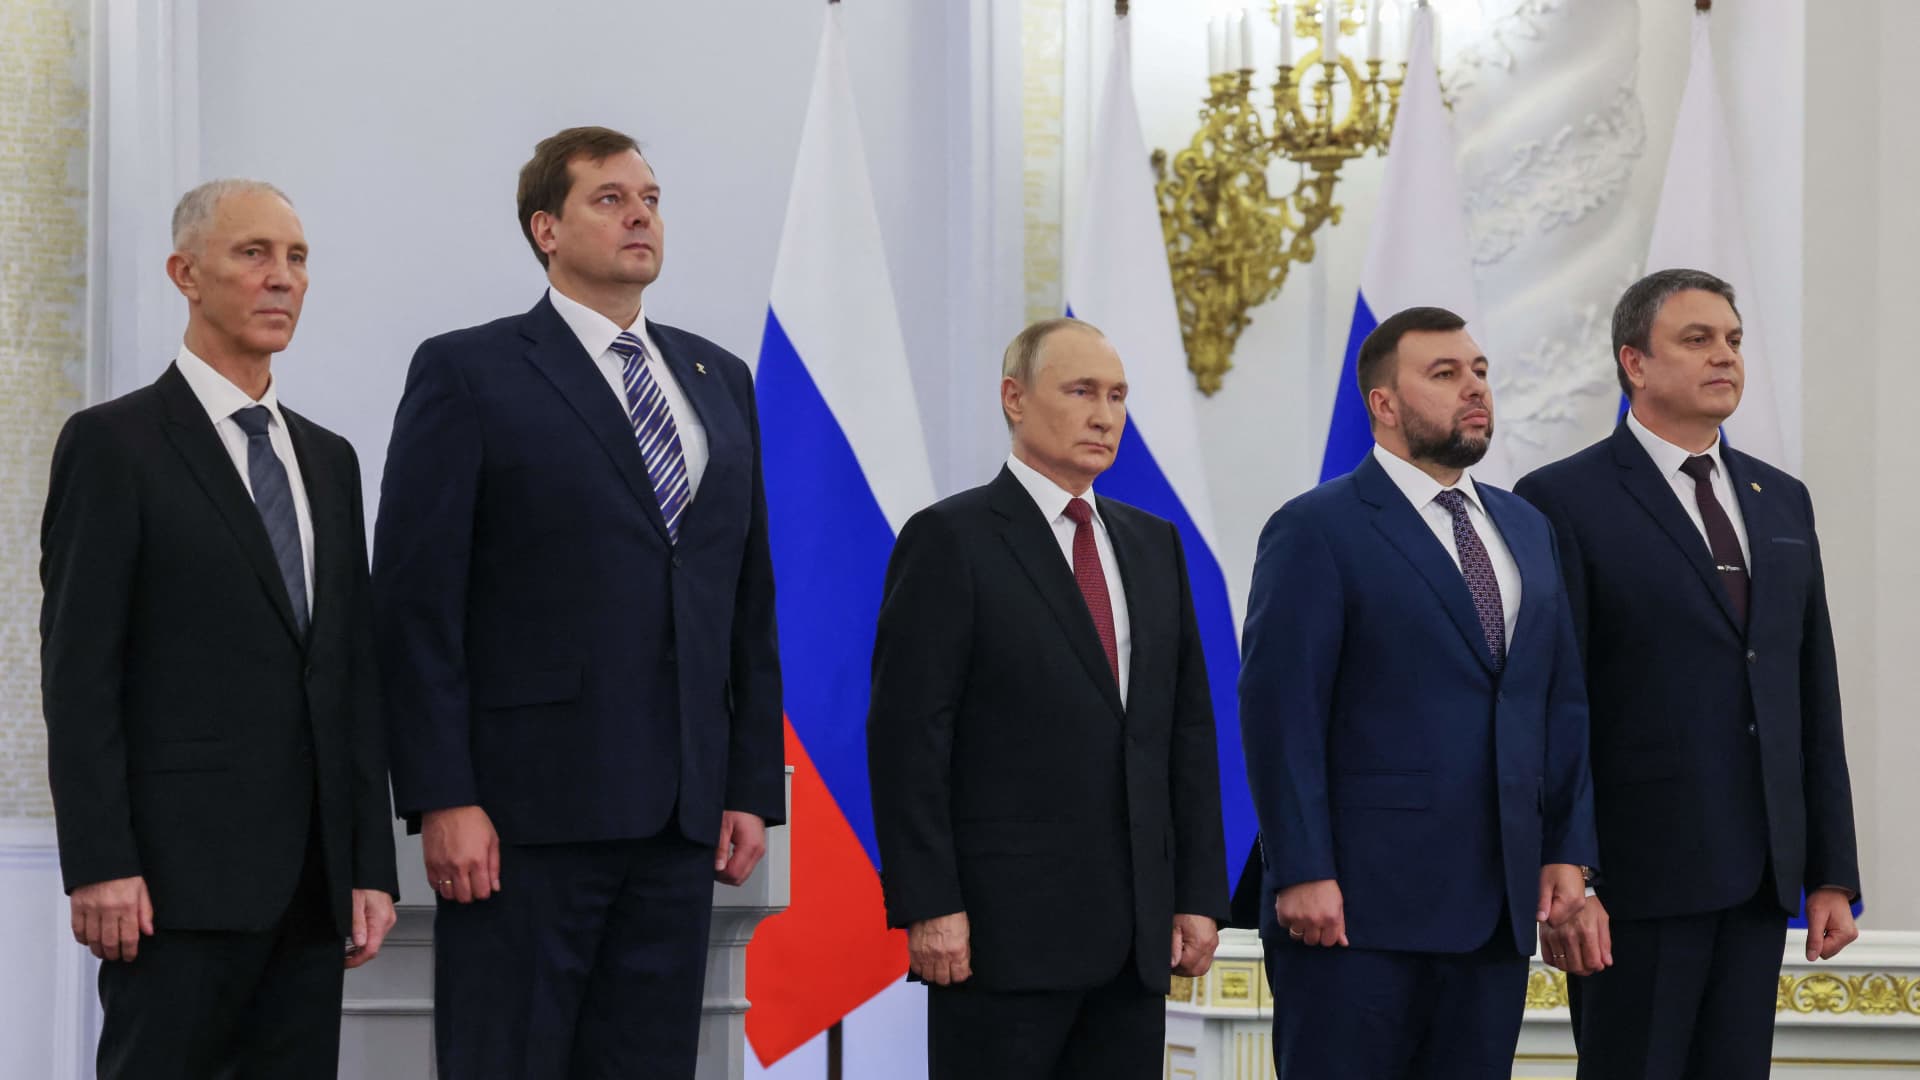 (From left) The Moscow-appointed heads of Kherson region Vladimir Saldo and Zaporizhzhia region Yevgeny Balitsky, Russian President Vladimir Putin, Donetsk separatist leader Denis Pushilin and Luhansk separatist leader Leonid Pasechnik listen to the Russian national anthem after signing treaties formally annexing four regions of Ukraine Russian troops occupy, at the Kremlin in Moscow on Sept. 30, 2022.